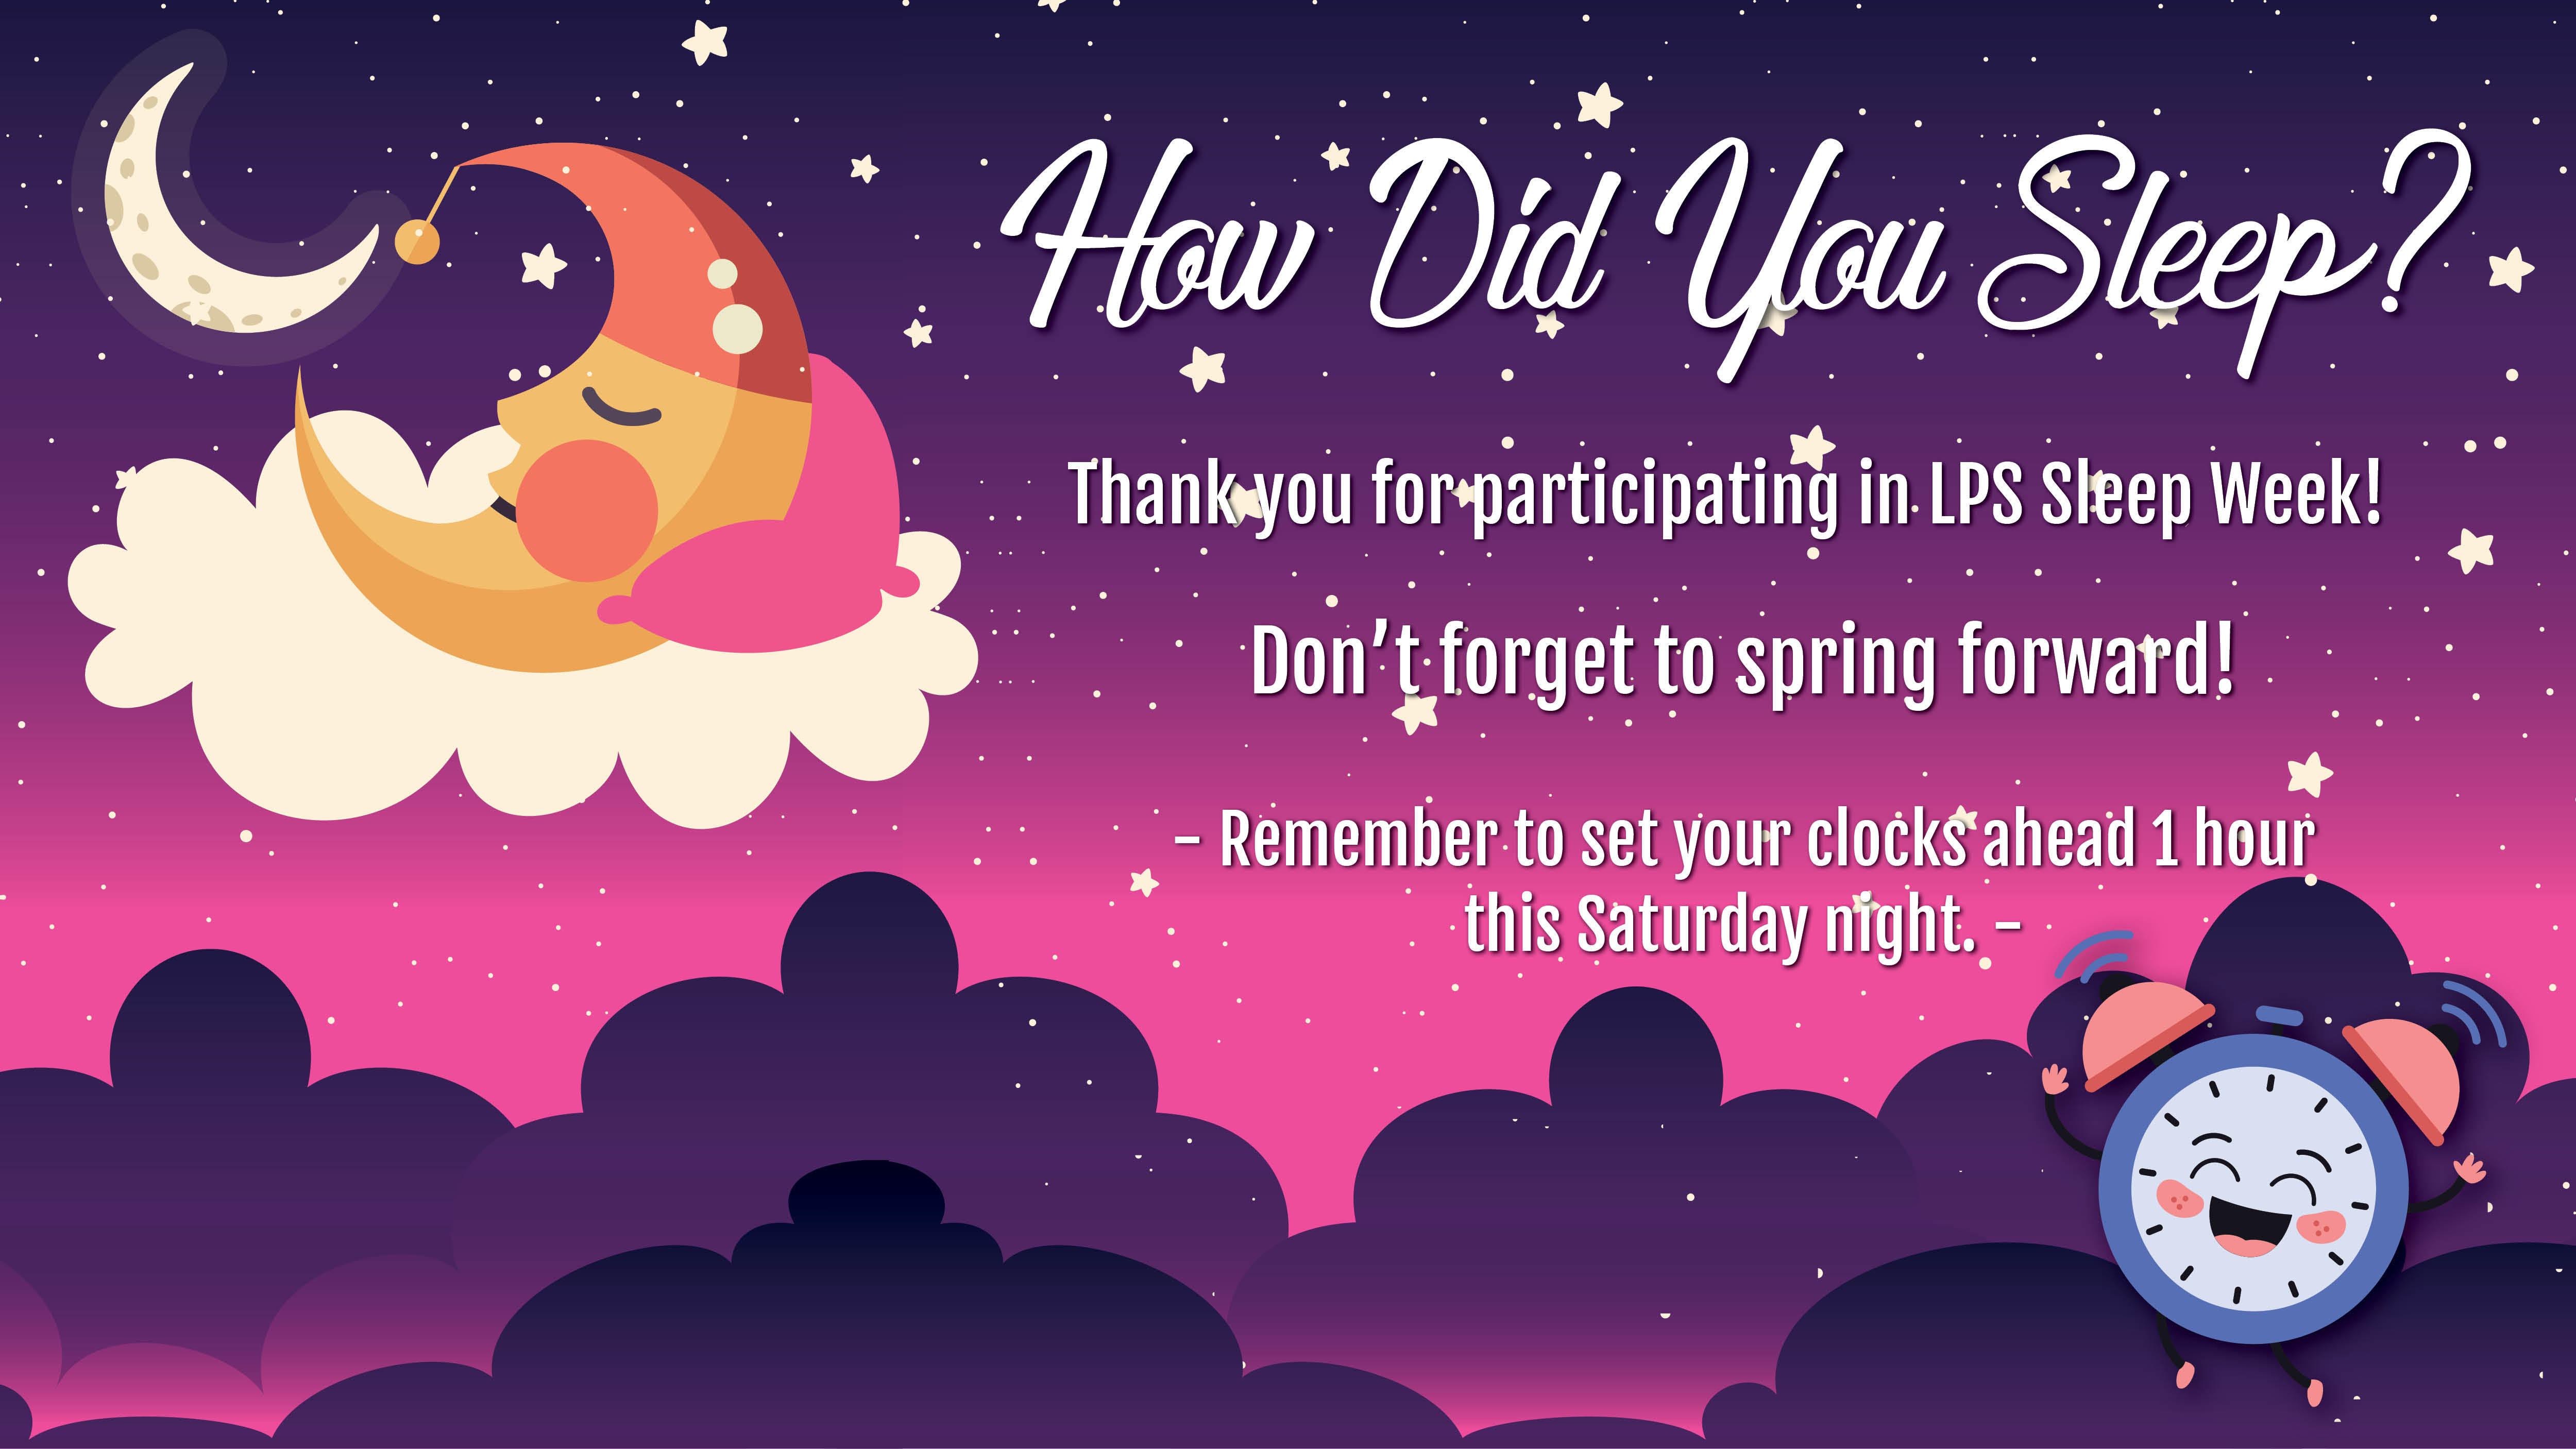 Thank you for participating in LPS Sleep Week! Don't forget to spring forward and set your clock's forward one hour Saturday night, March 11, 2023!